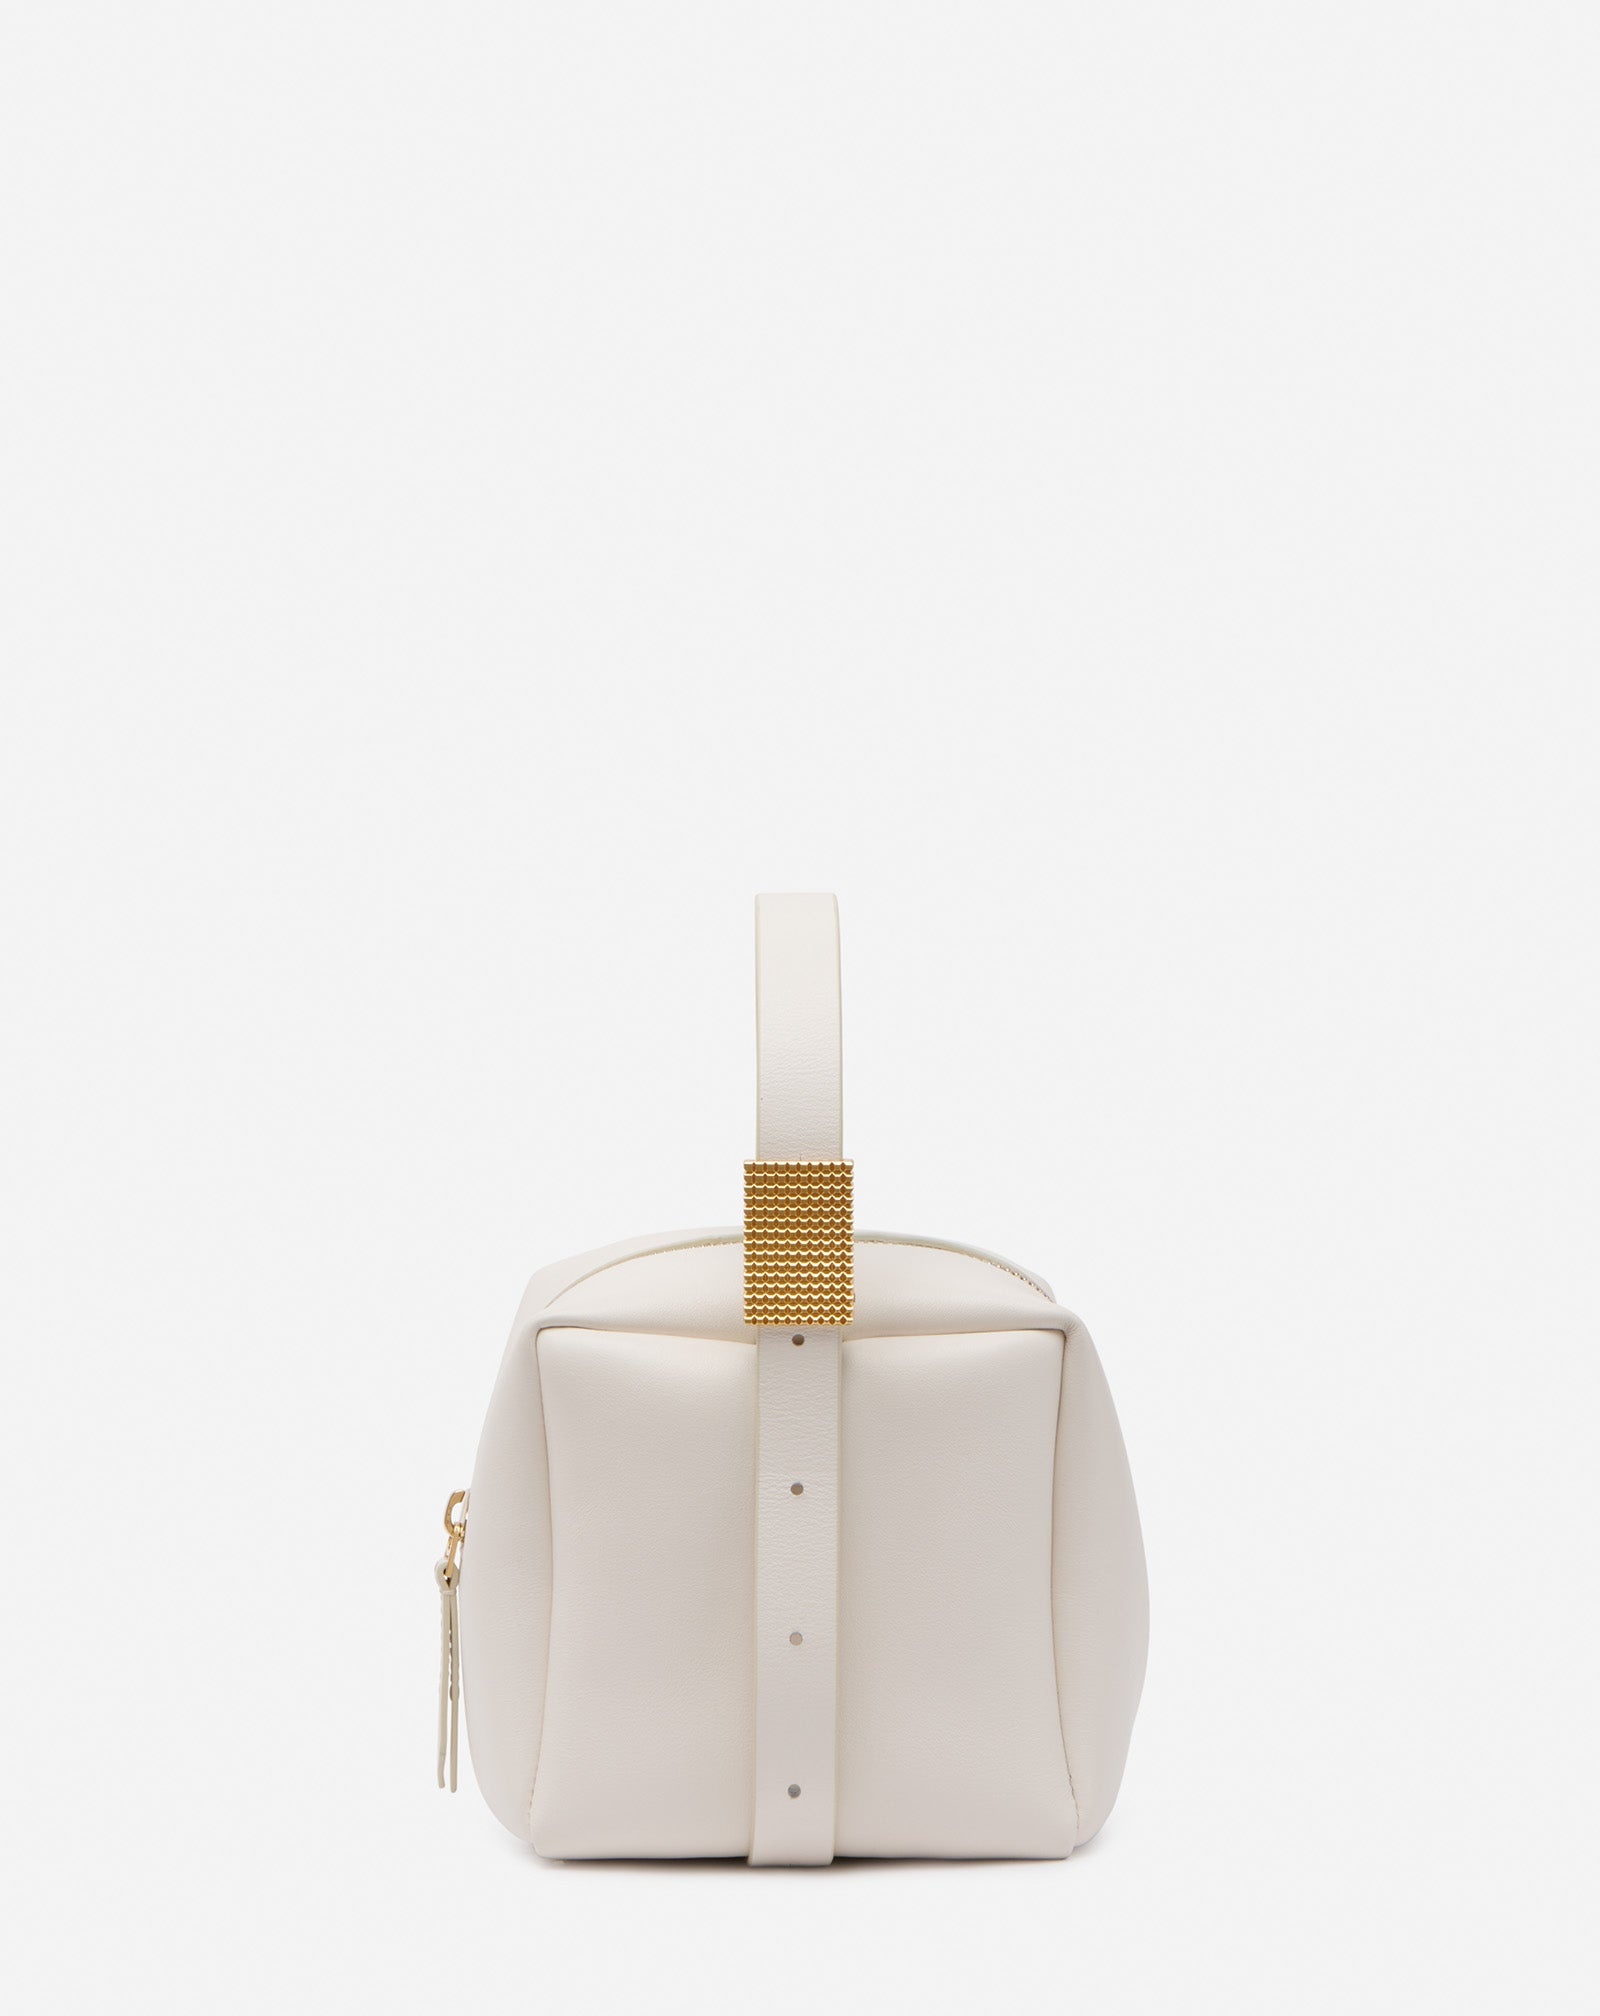 TEMPO BY LANVIN LEATHER BAG - 1